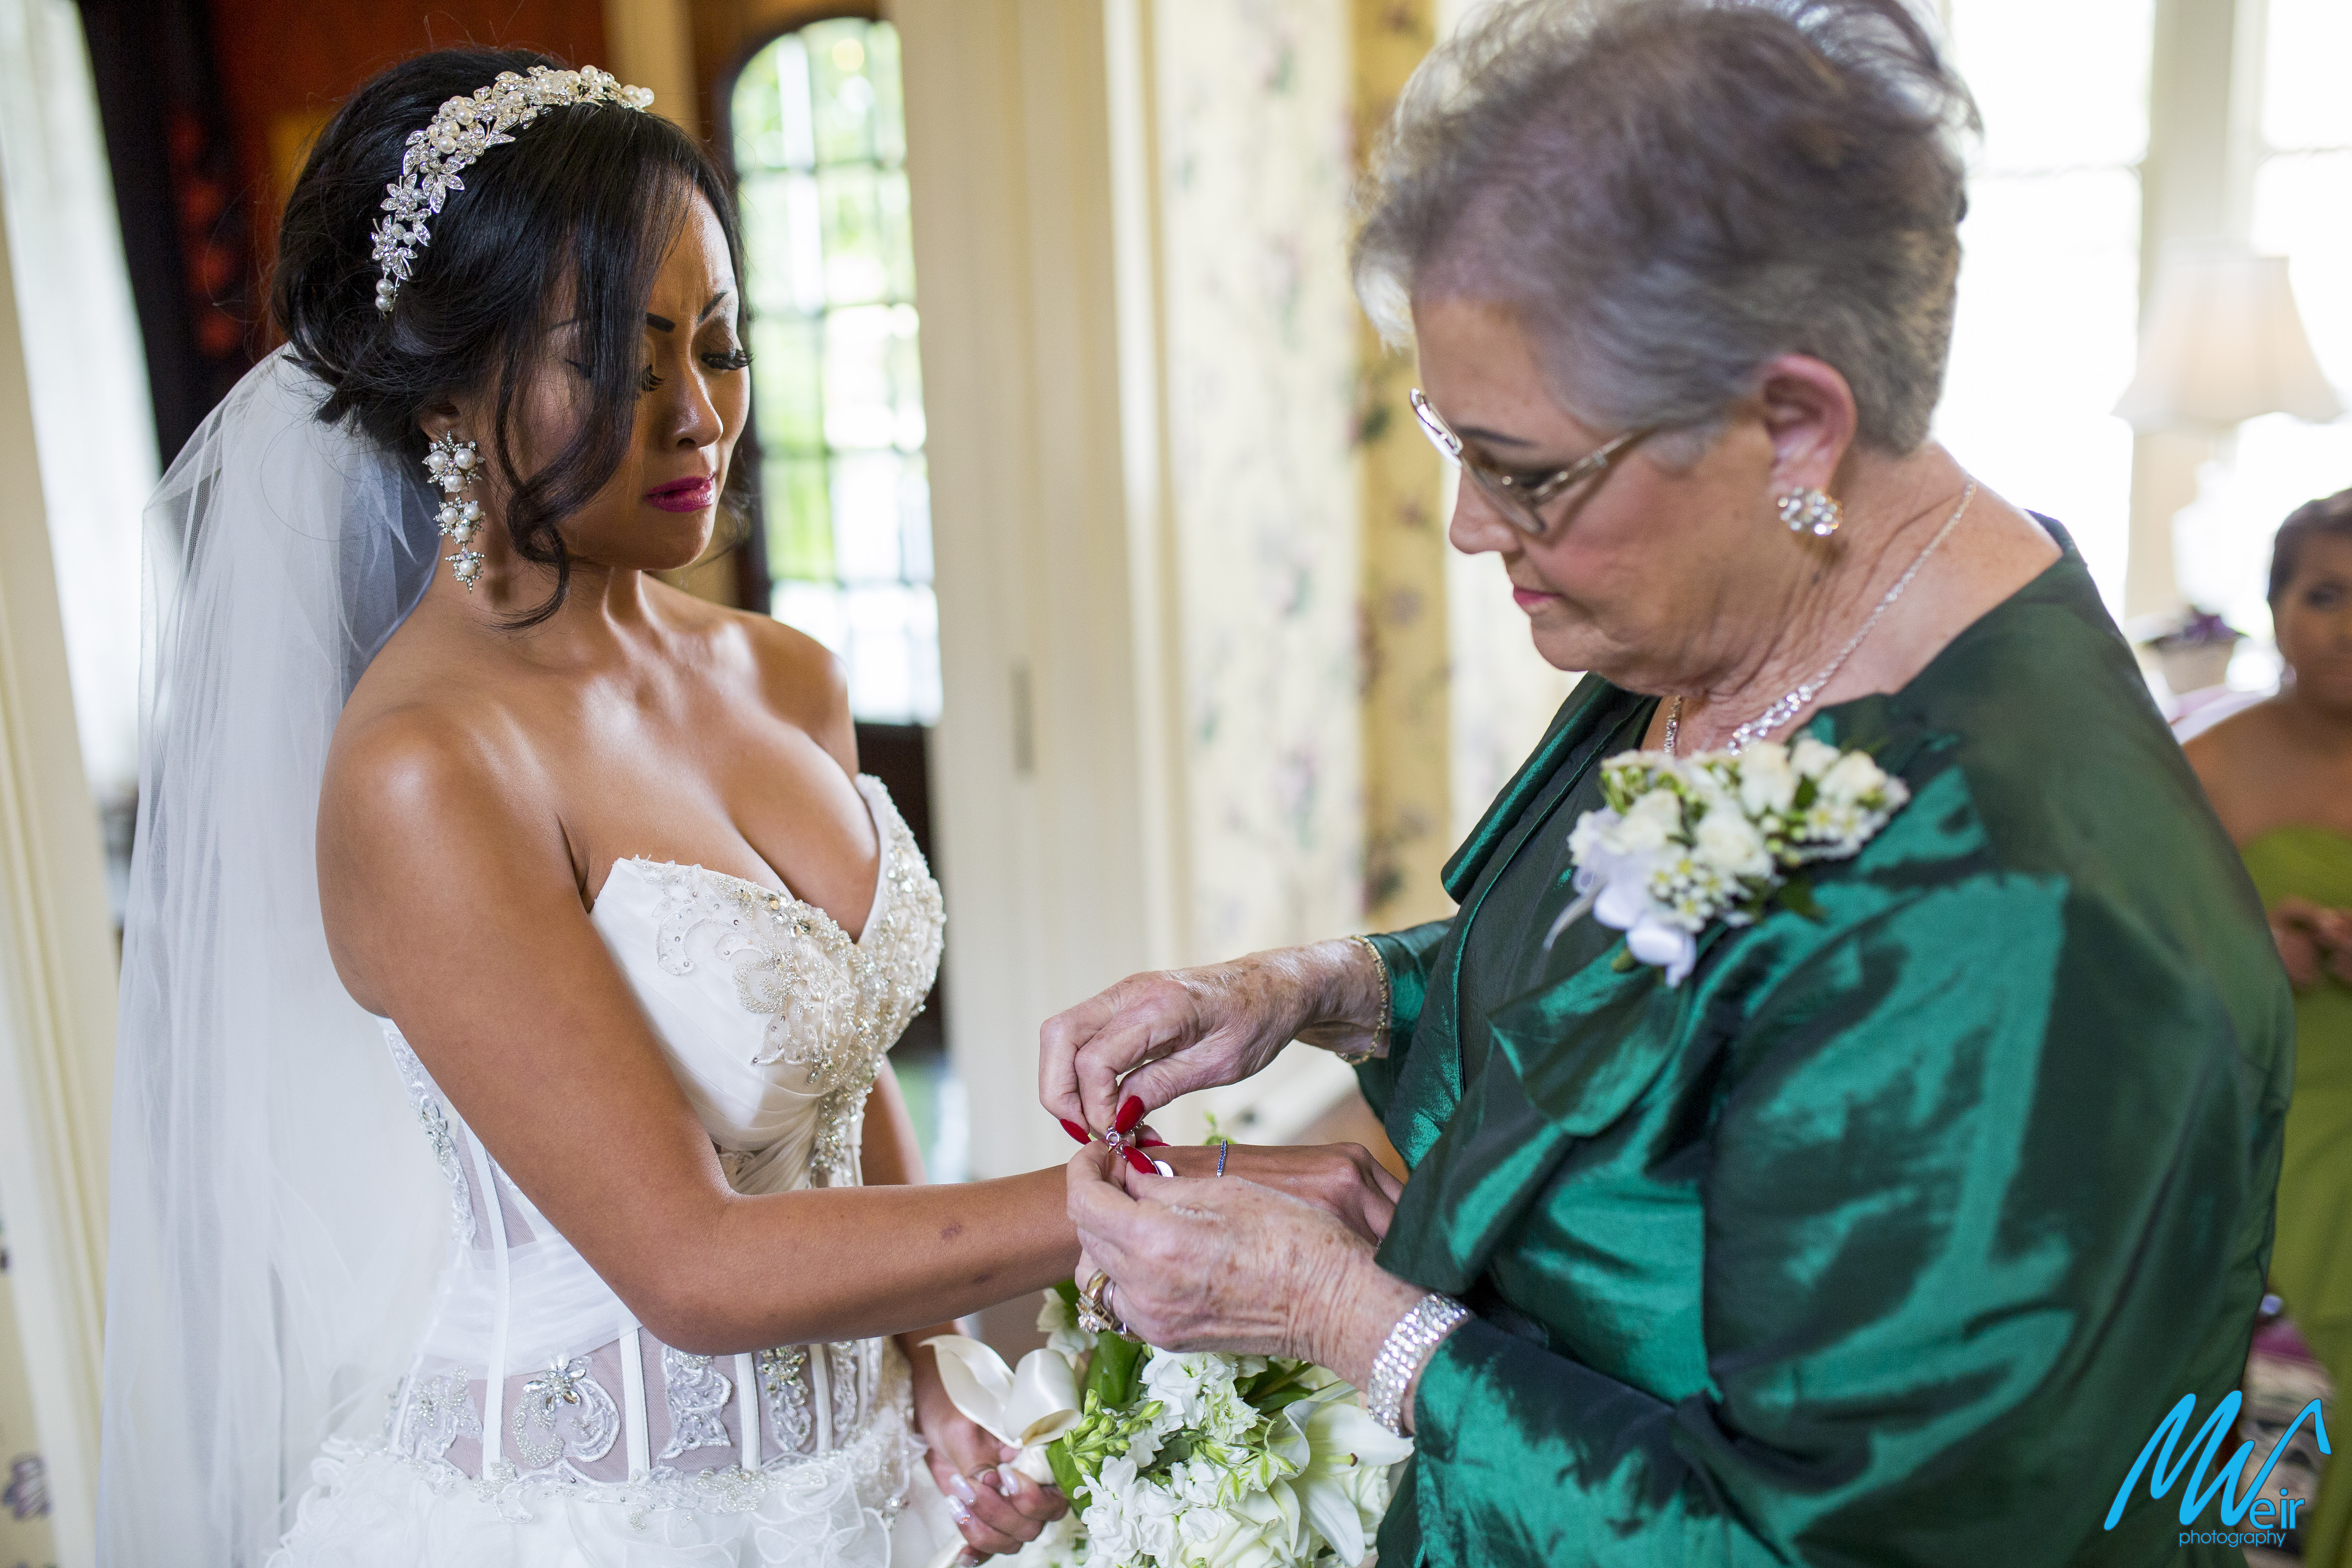 mother of the groom puts her charm bracelet on brides wrist as her something borrowed